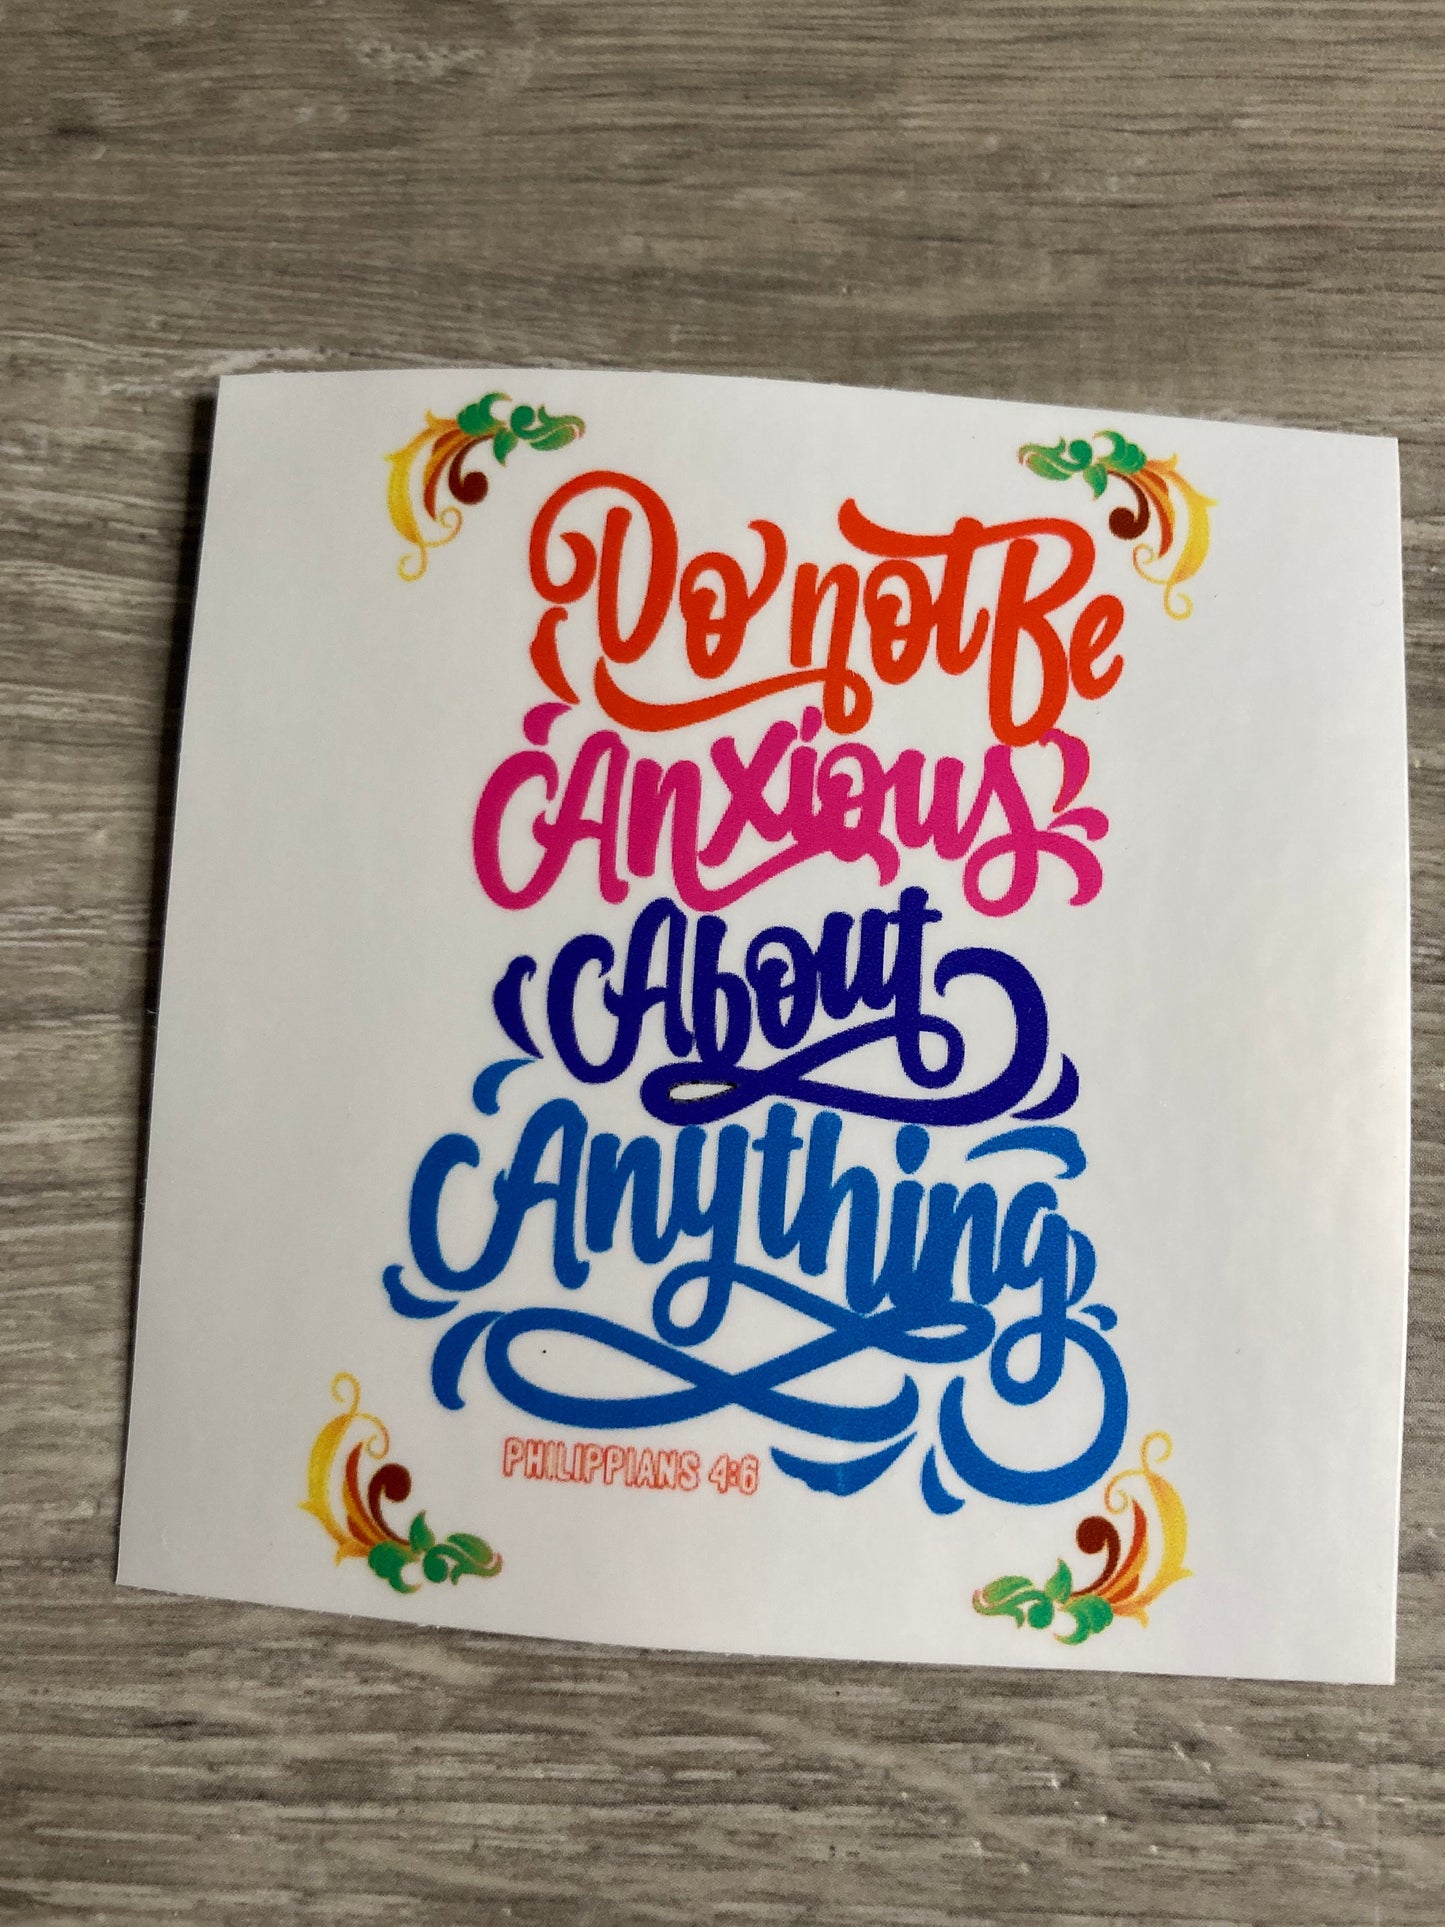 Do Not Be Anxious About Anything Vinyl Sticker, Vinyl Decal, Laptop Sticker, Recovery Sticker, Encouragement